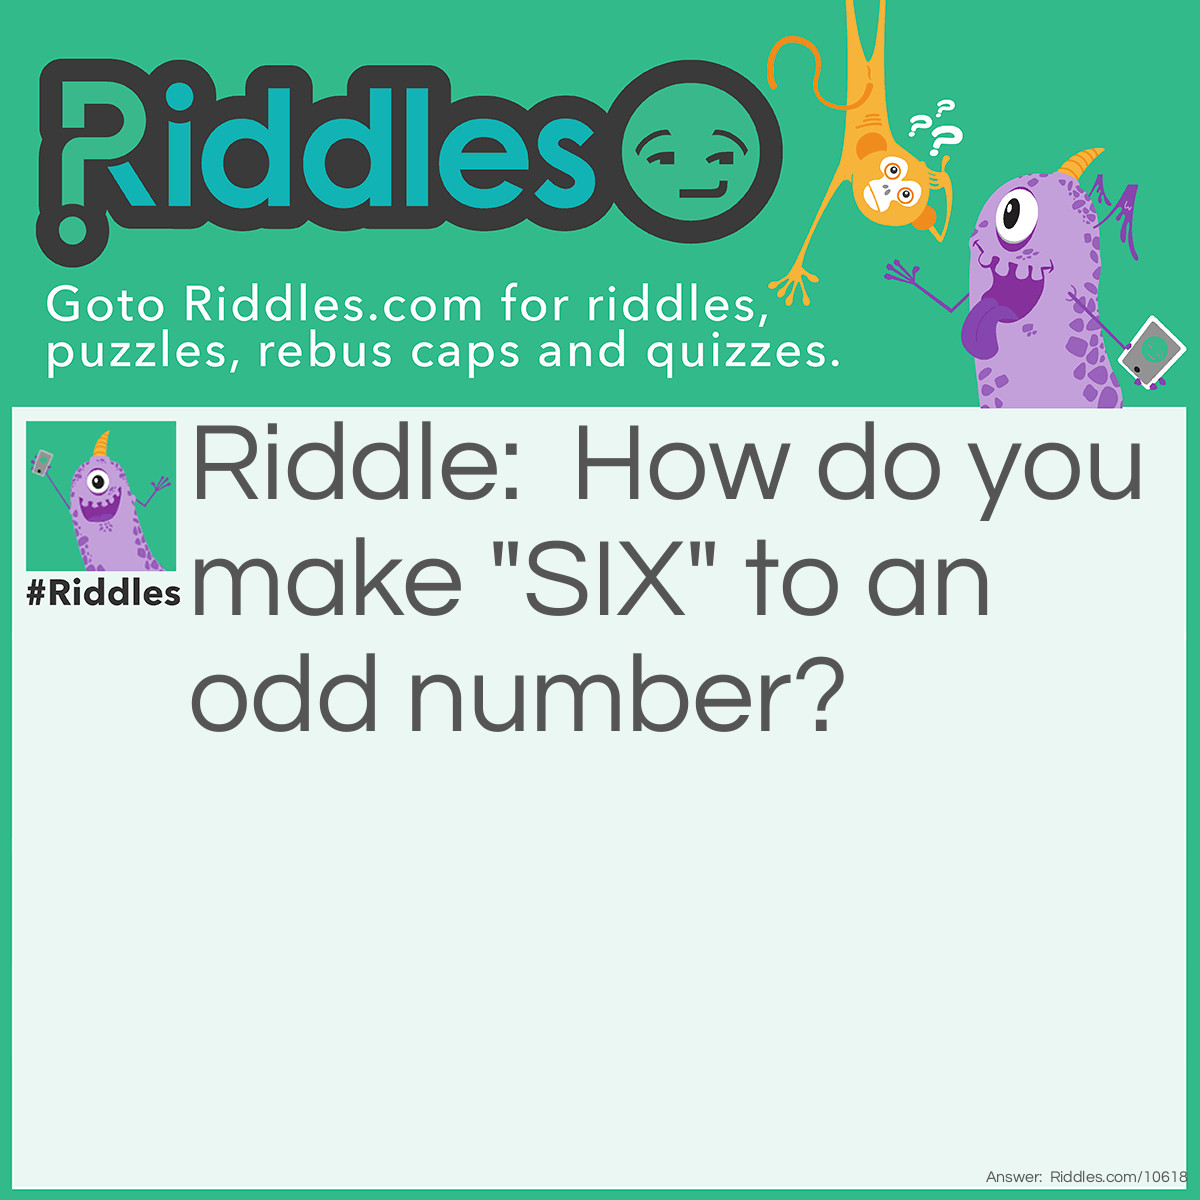 Riddle: How do you make "SIX" to an odd number? Answer: Remove the "S" which leaves IX which is 9 in roman numerals.